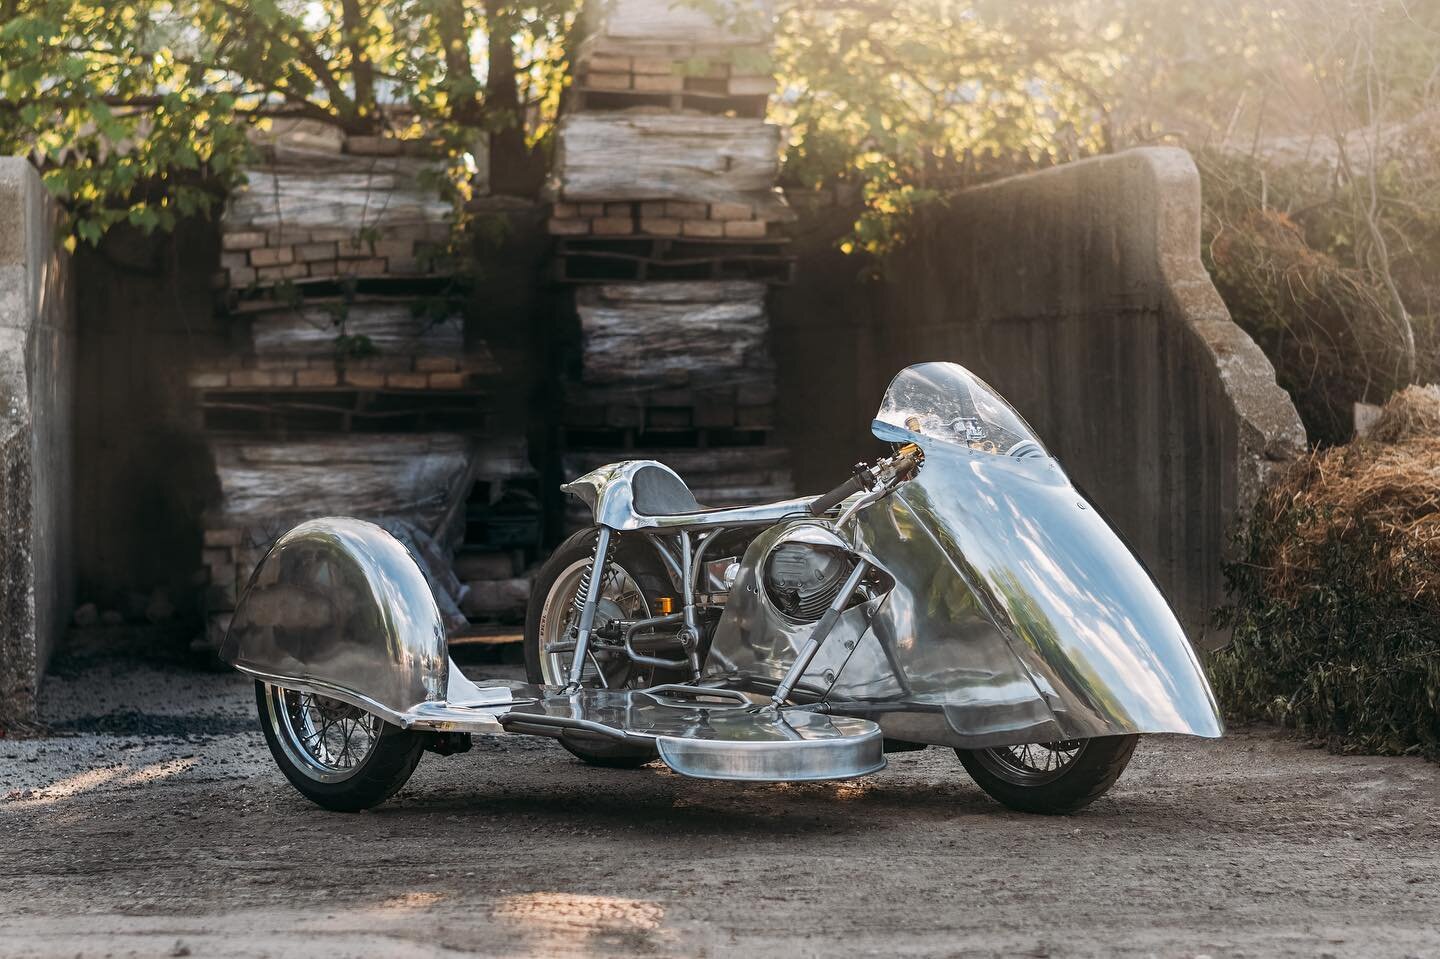 Craig Rodsmith&rsquo;s extraordinary piece of craftsmanship showcases a vintage Moto Guzzi motorcycle of iconic status. This machine stands out due to its meticulously designed, fluid bodywork, and inspiring engineering. Initially conceived as a func